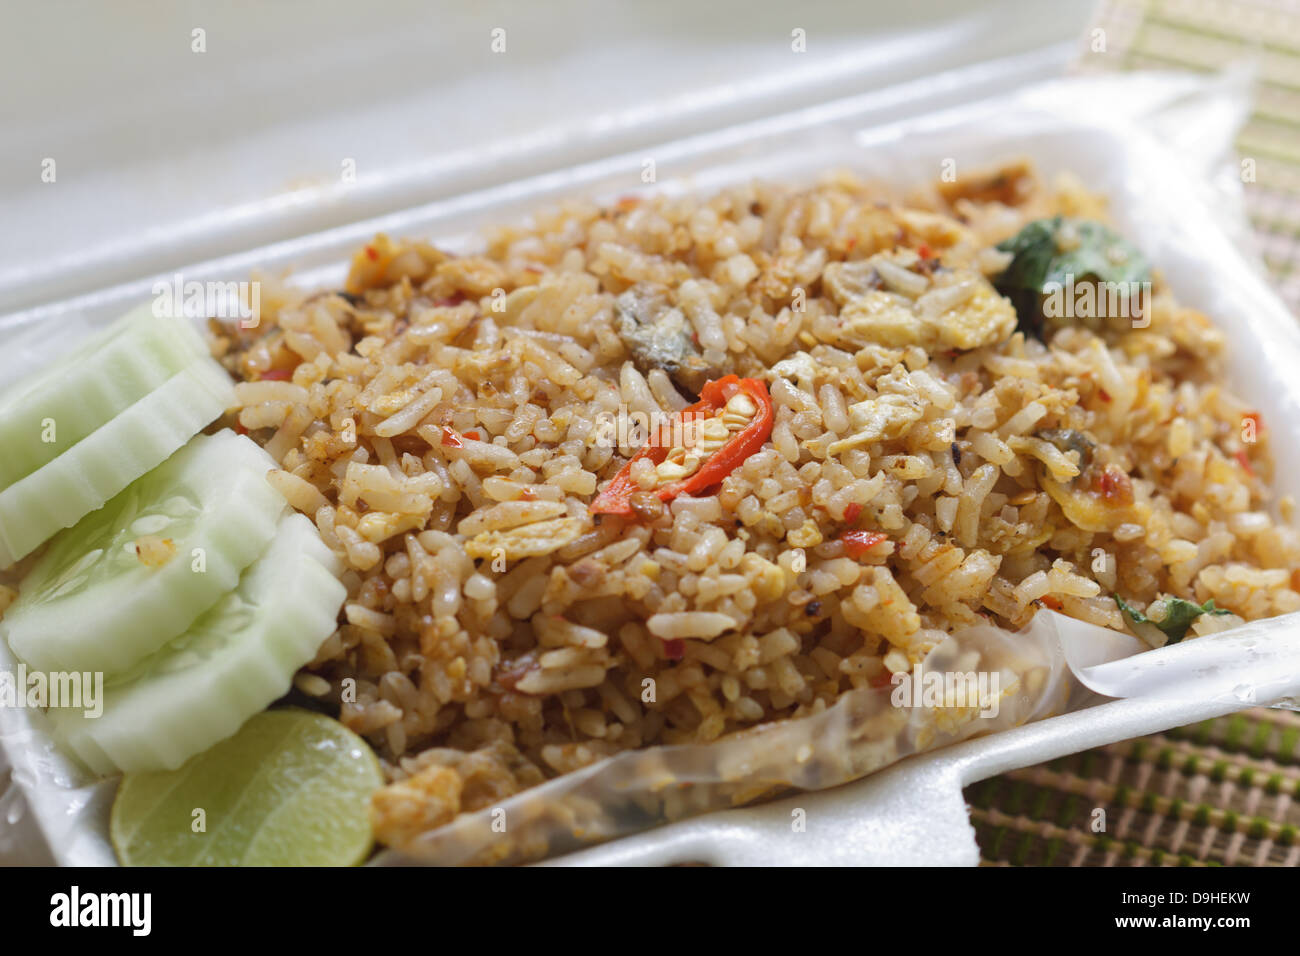 Spicy Fried Rice with clams in a white box Stock Photo